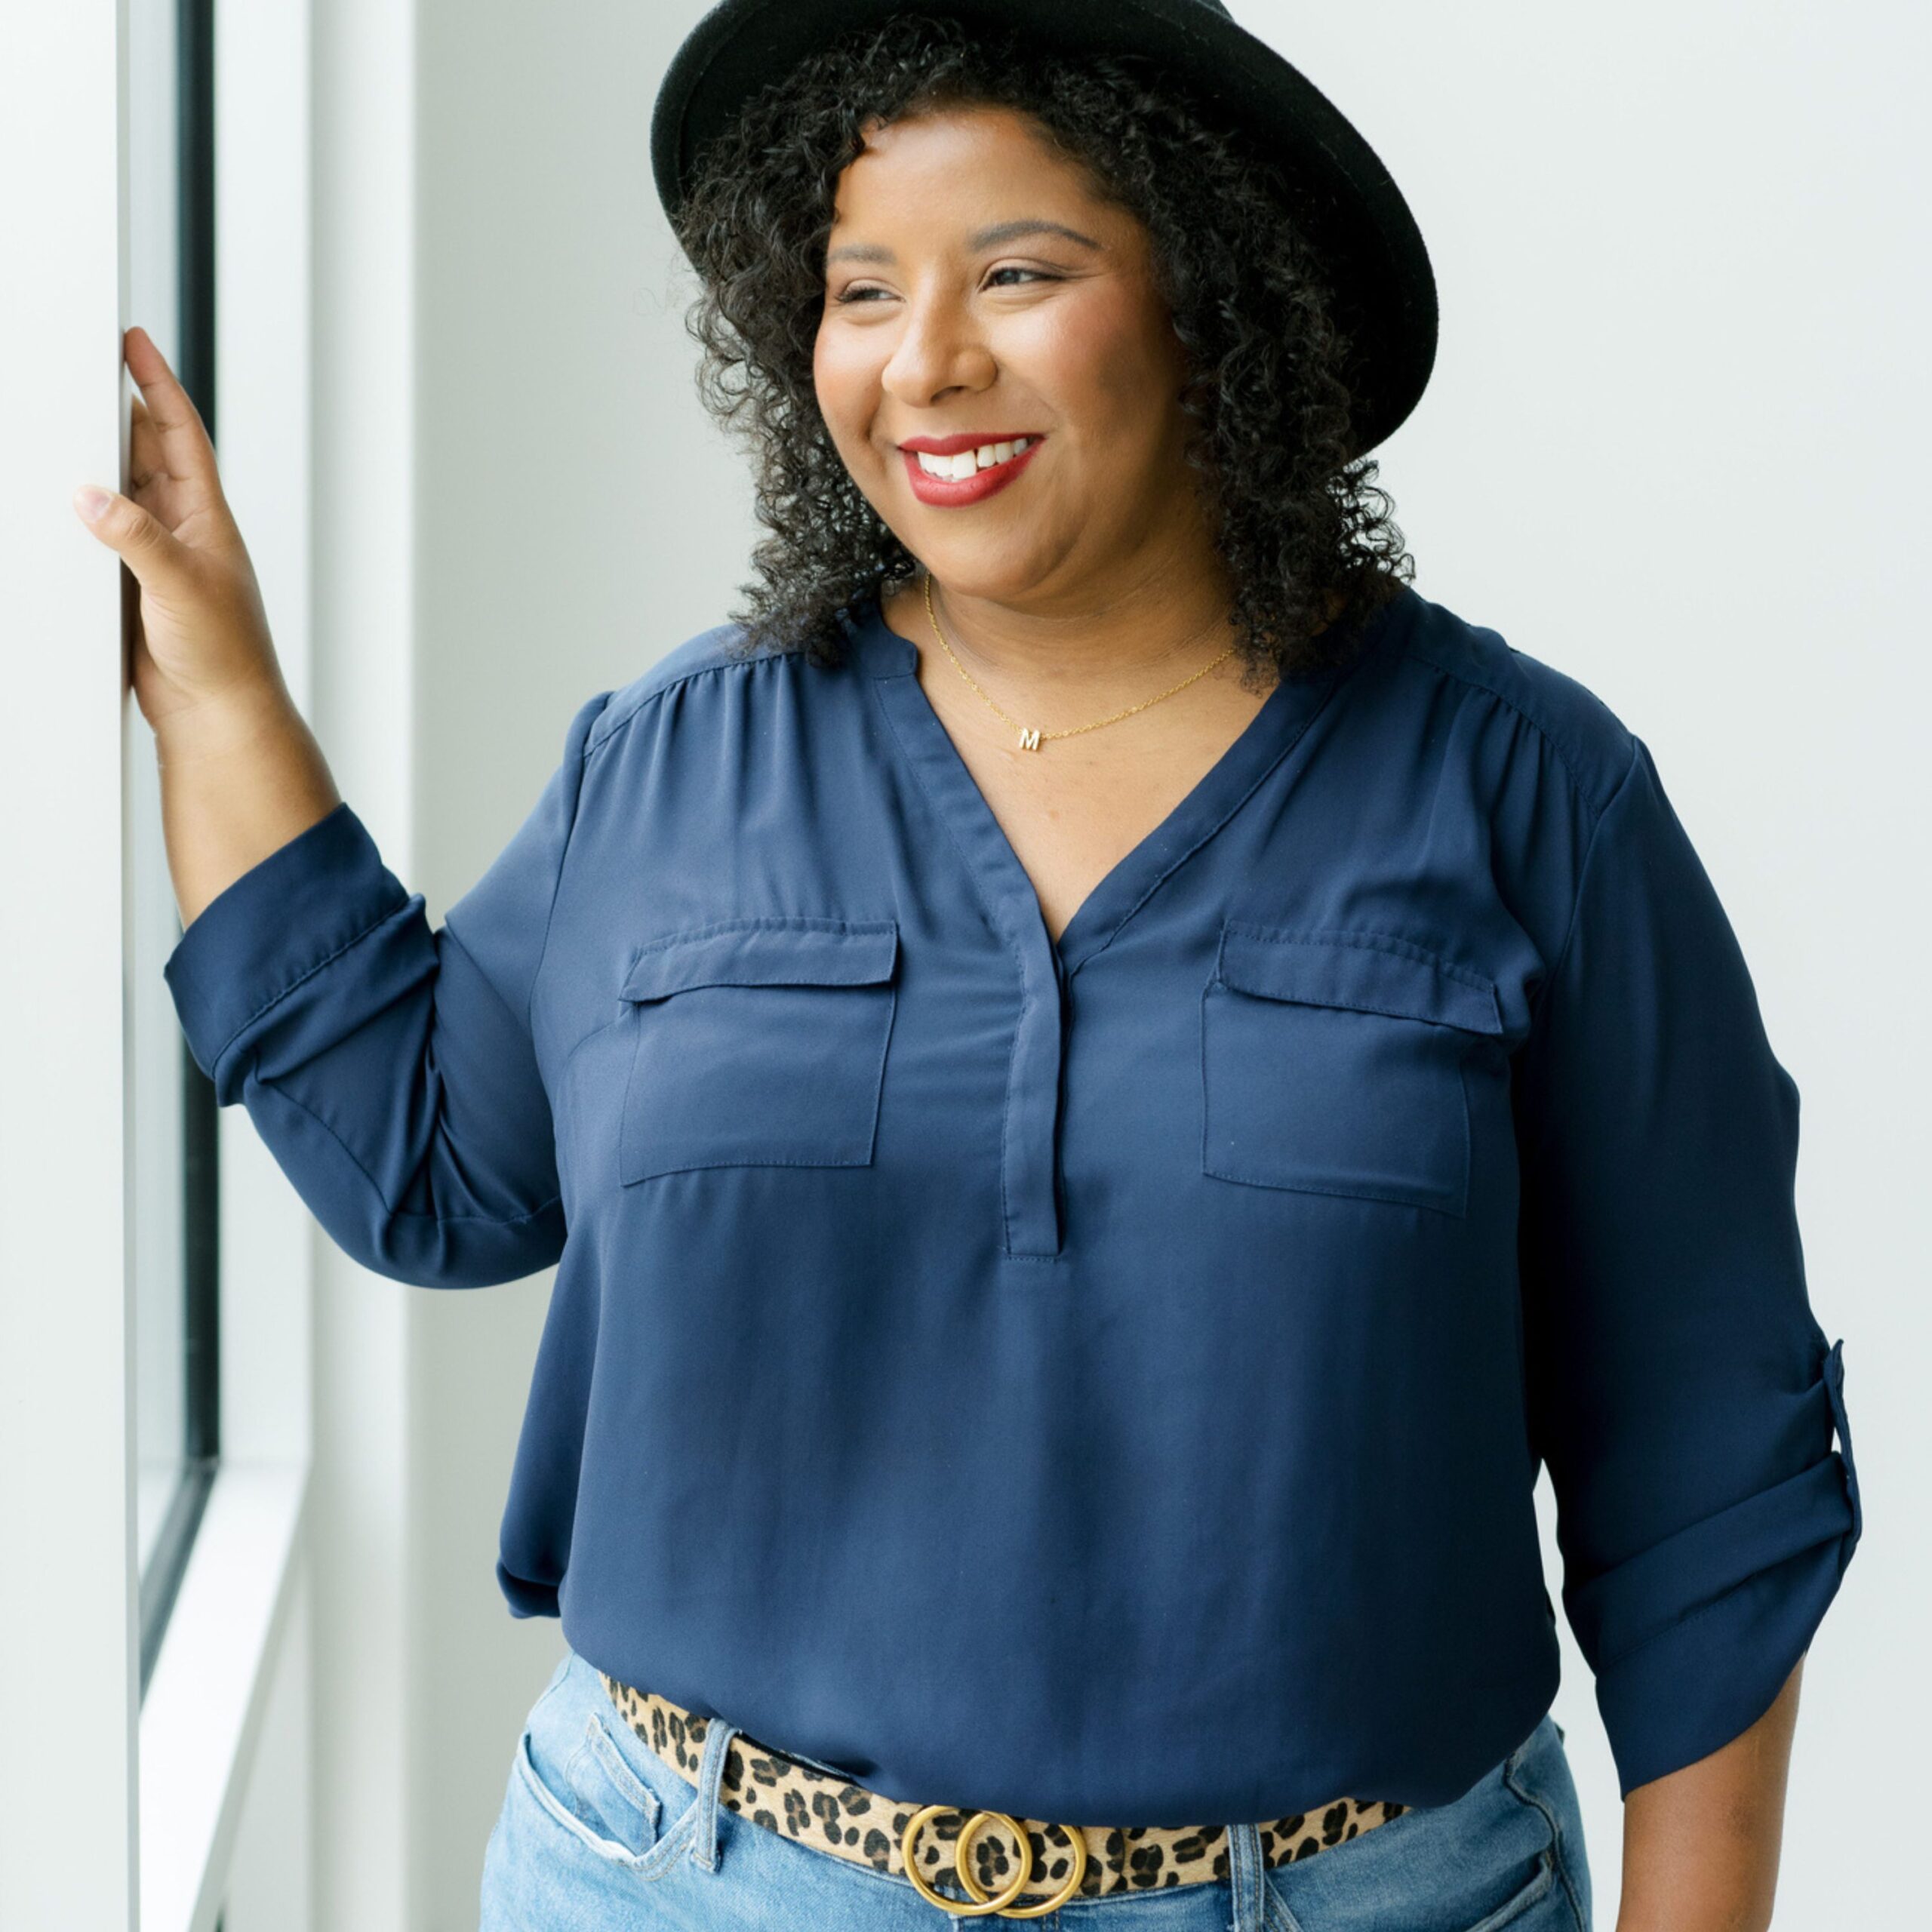 Woman in a blue blouse and black hat smiling by a window.